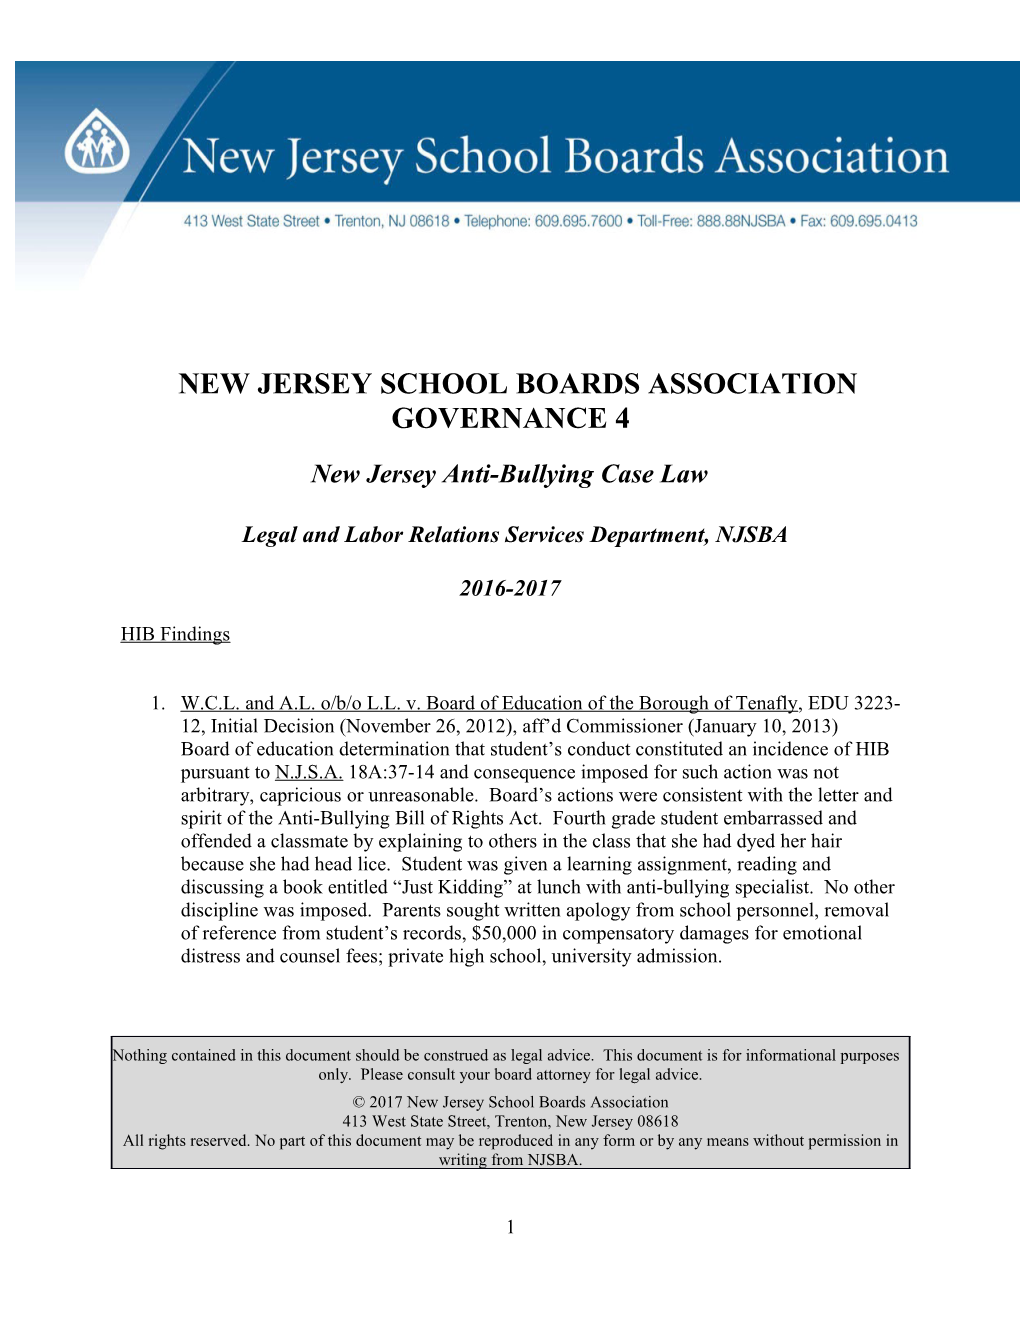 Legal and Labor Relations Services Department, NJSBA